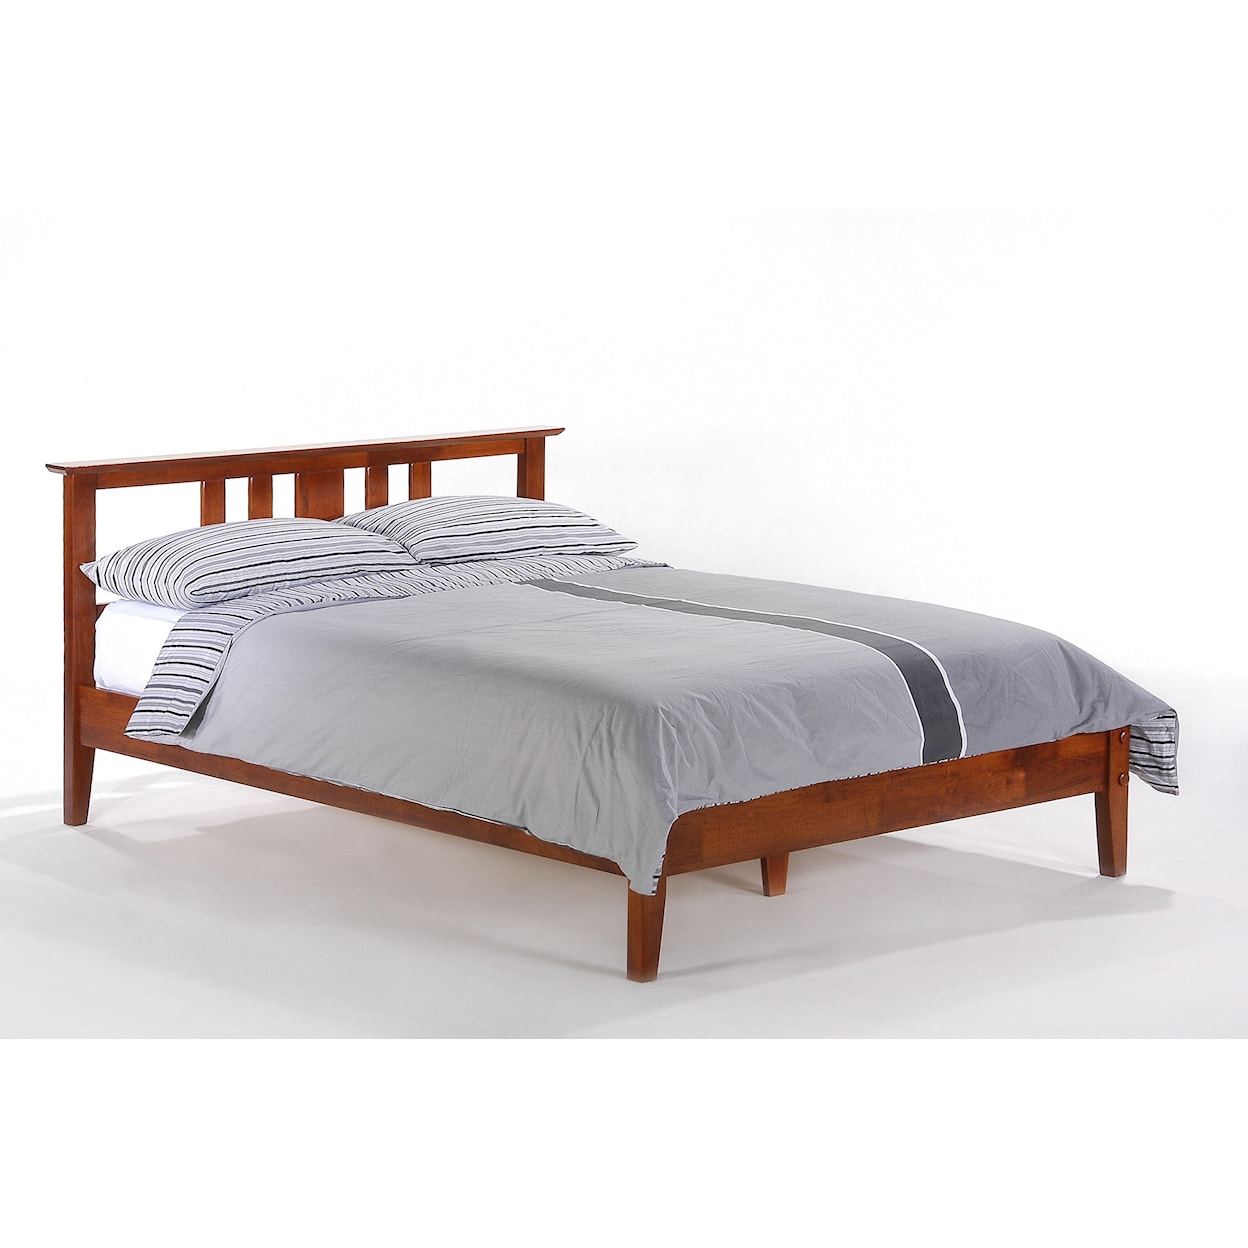 Pacific Manufacturing Thyme Twin Bed